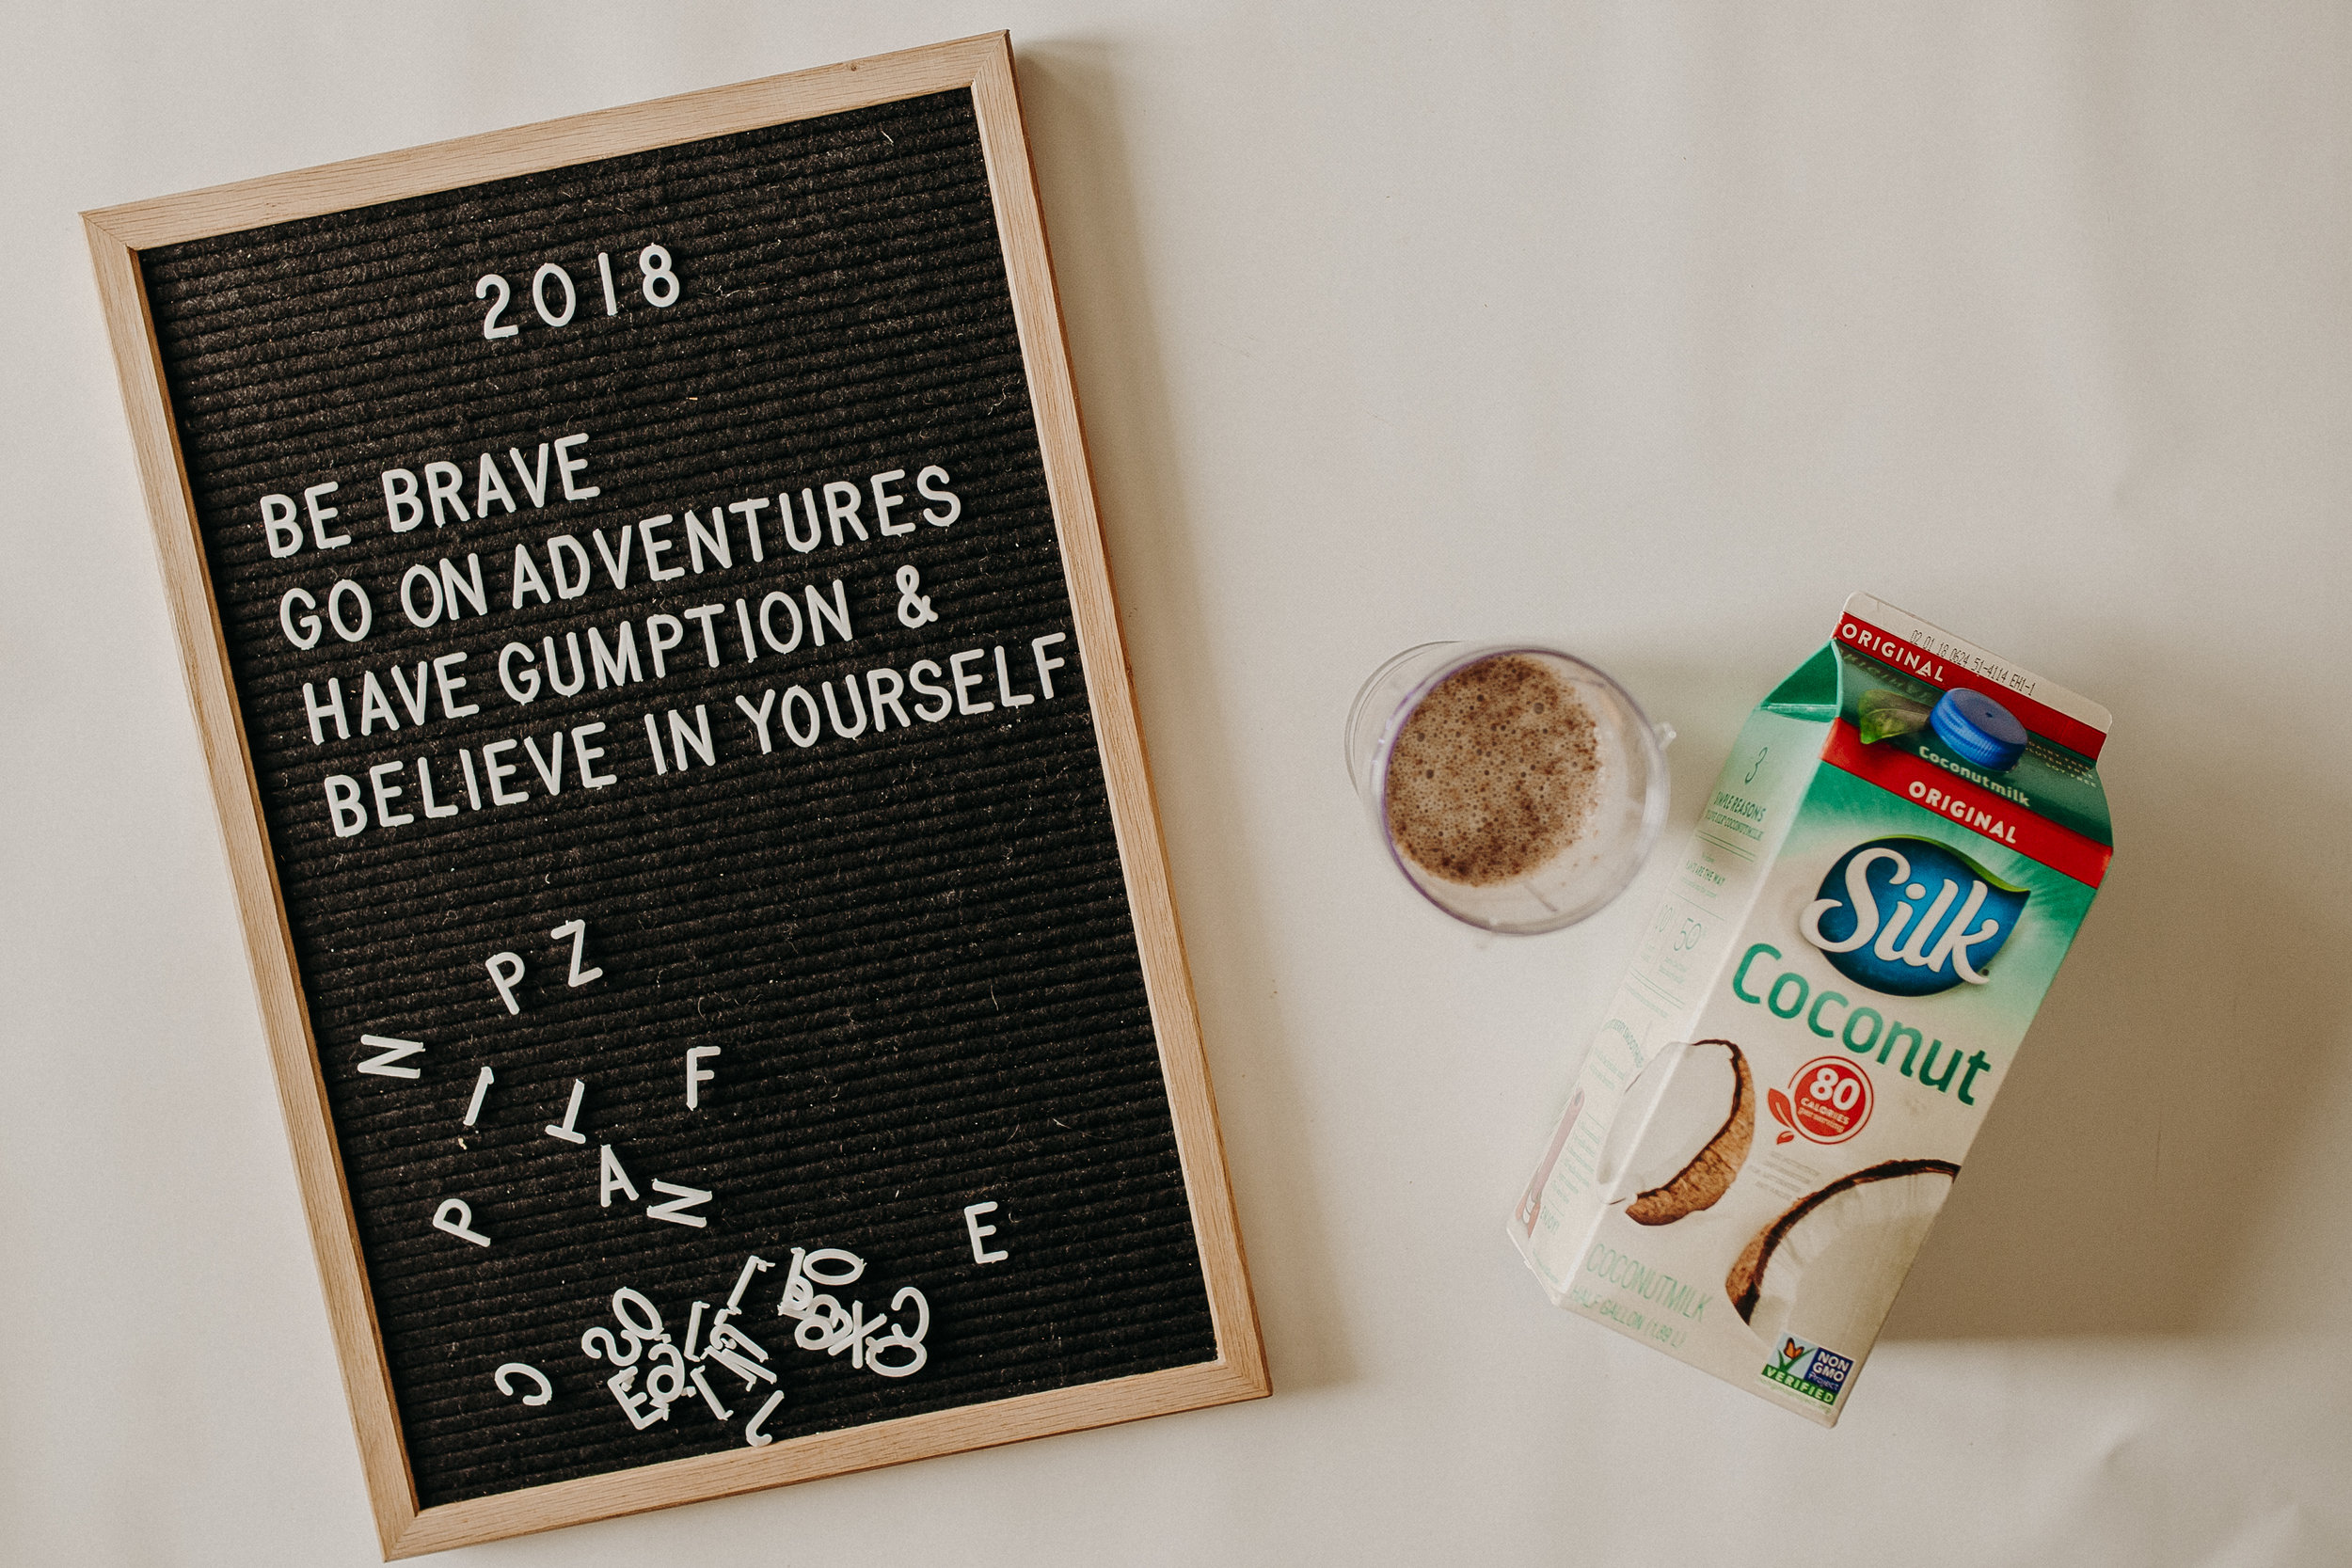 Silk-Almond-Milk-New-Year-New-You-Sticking-To-Your-Goals-6.jpg